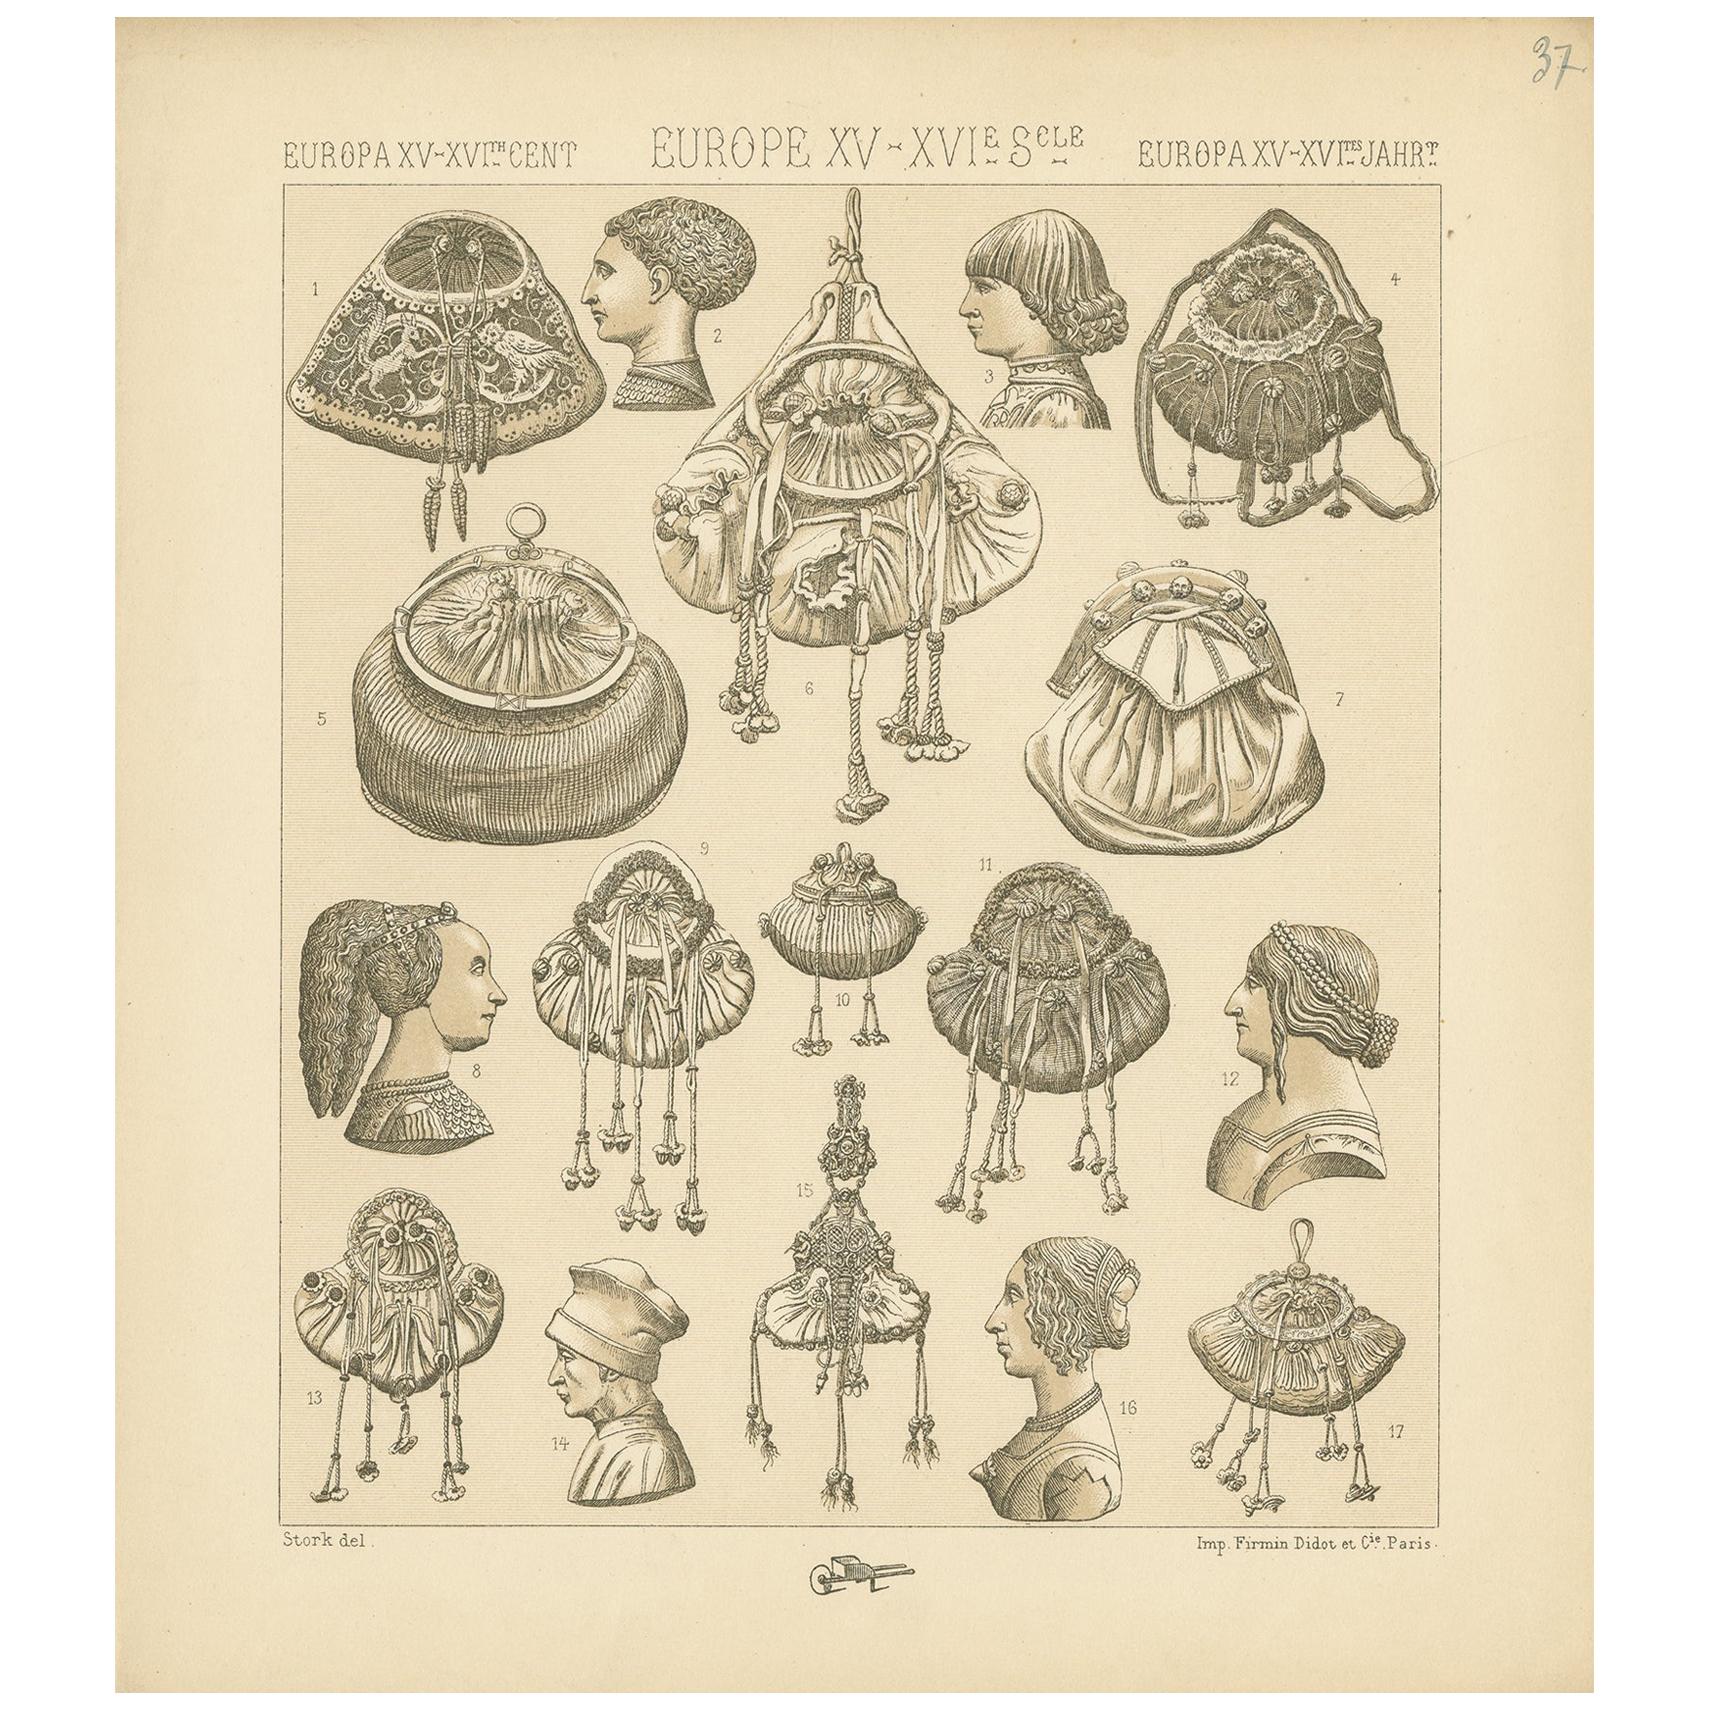 Pl 37 Antique Print of European 15th-16th Century Decorative Objects by Racinet